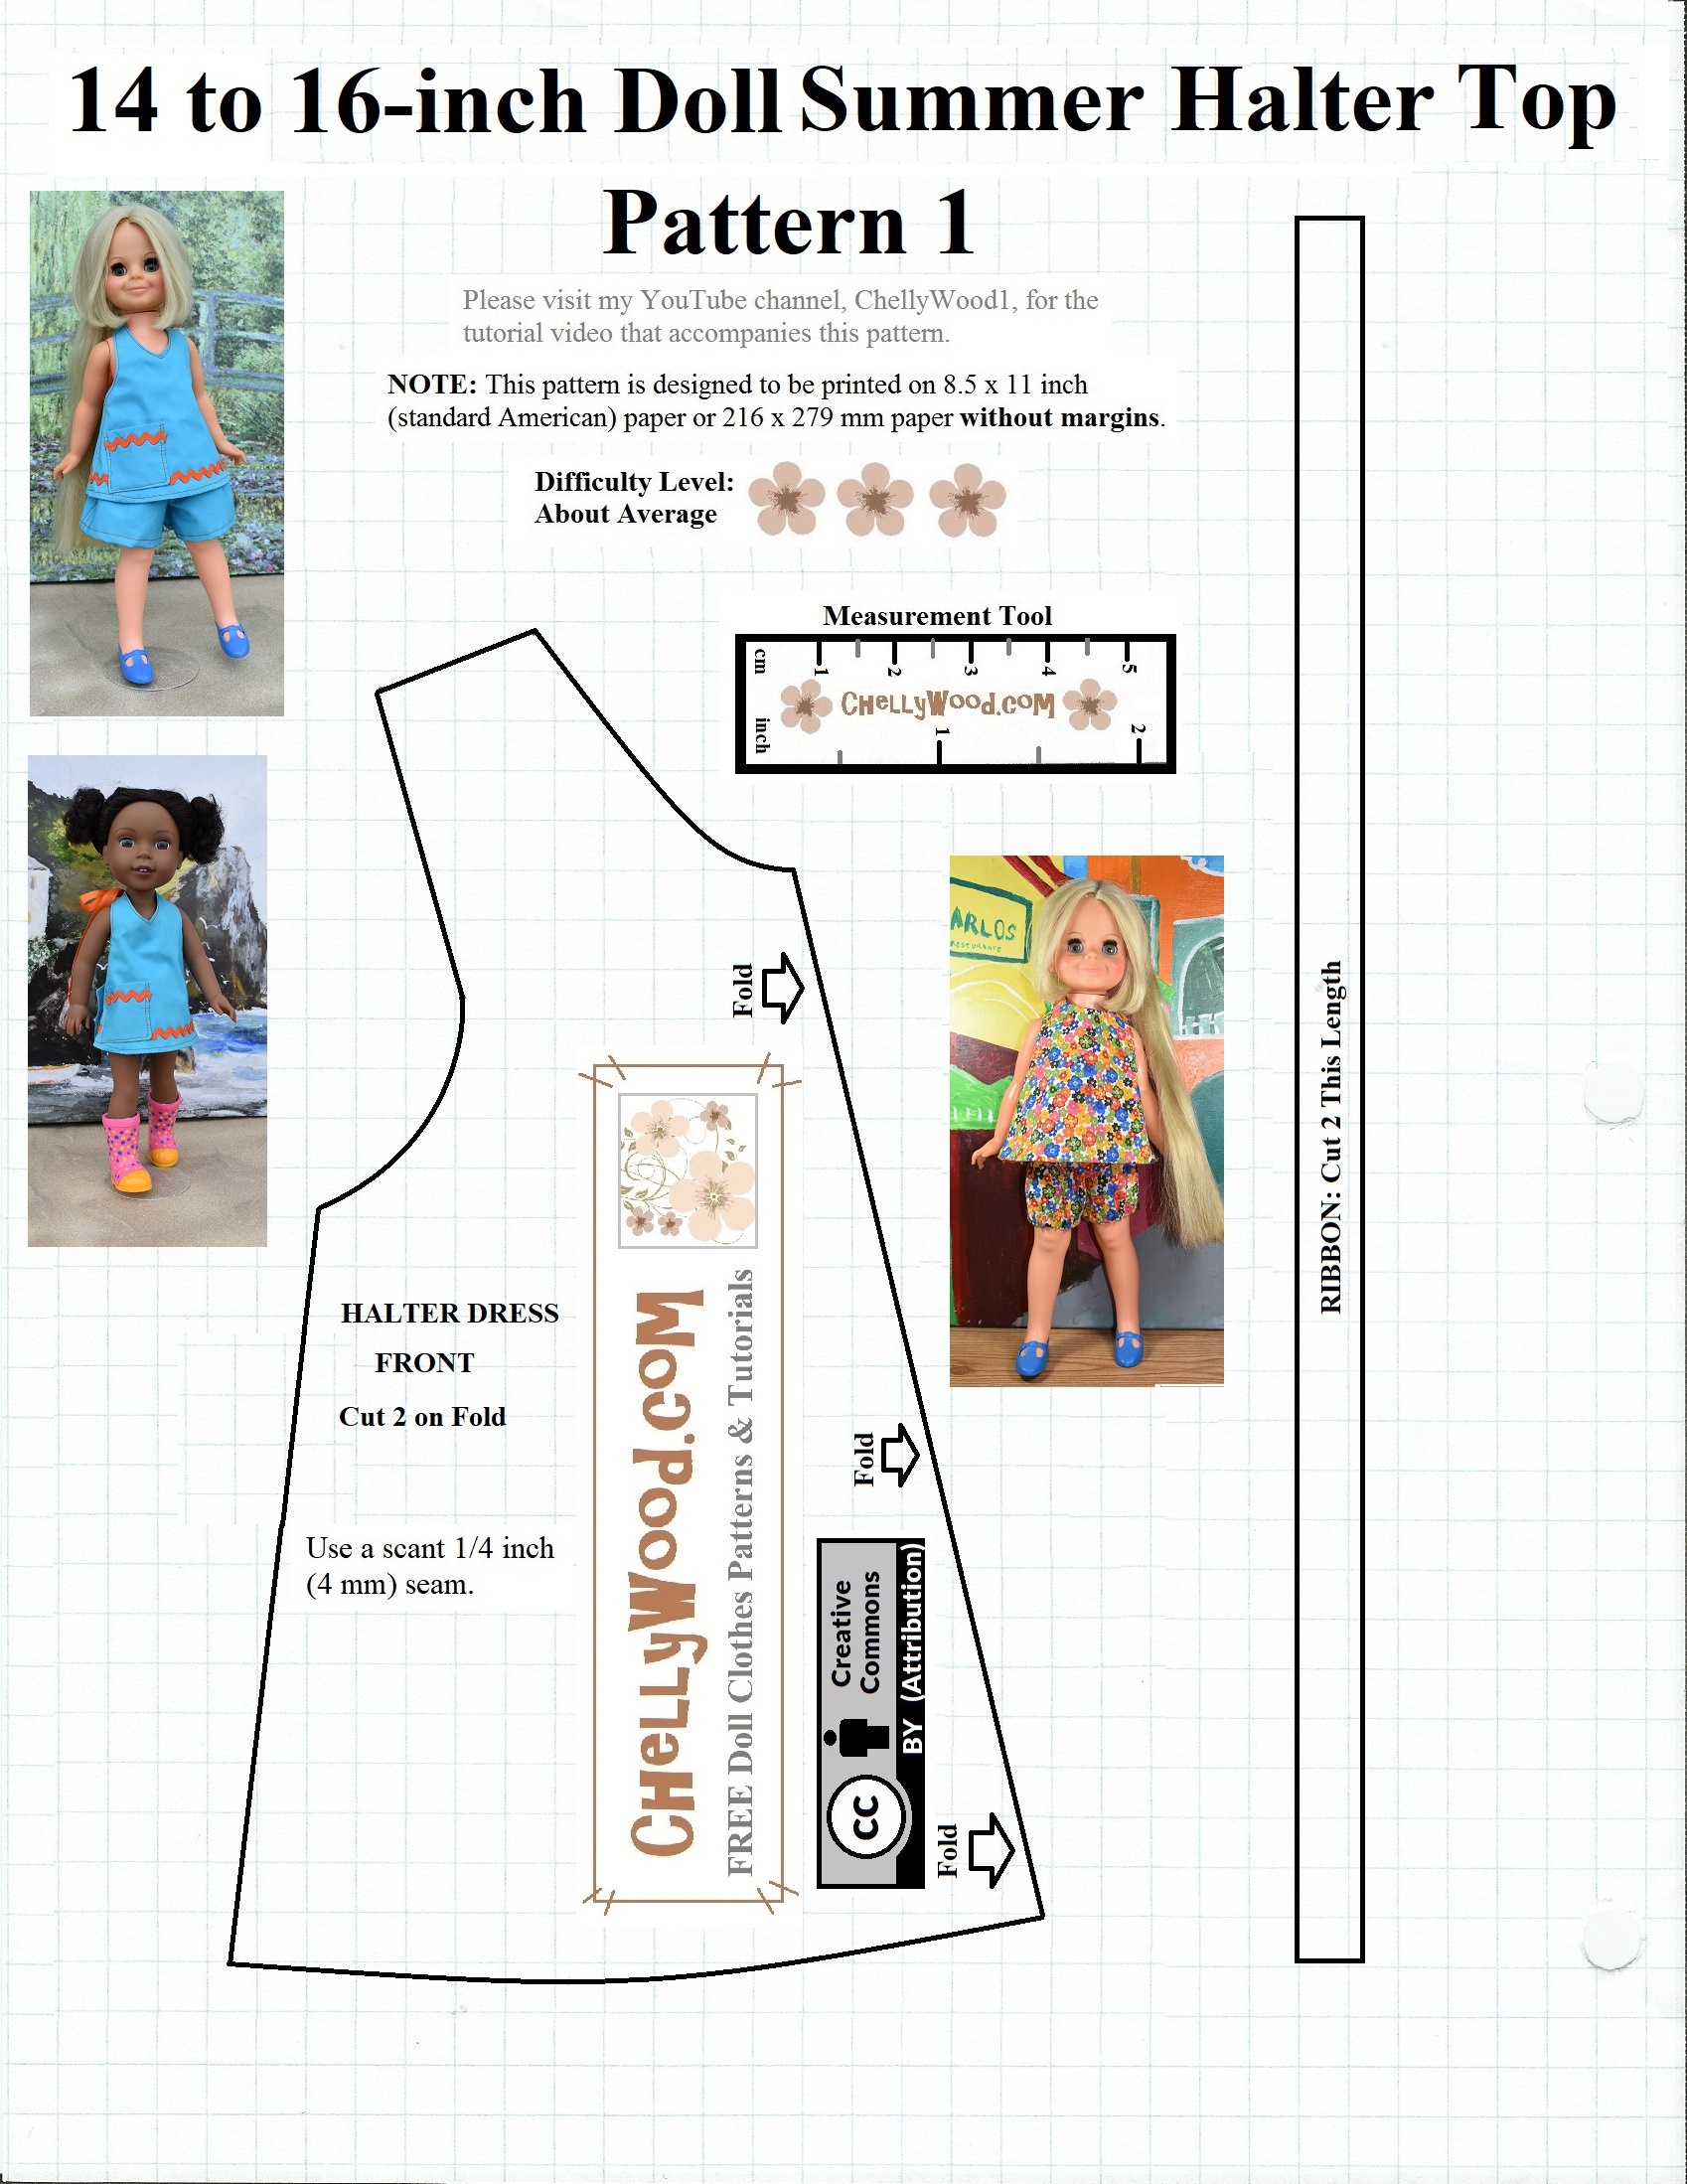 American_Girl Or 18-Inch #dolls #summer Top #diy W/free #patterns - Free Printable Doll Clothes Patterns For 18 Inch Dolls